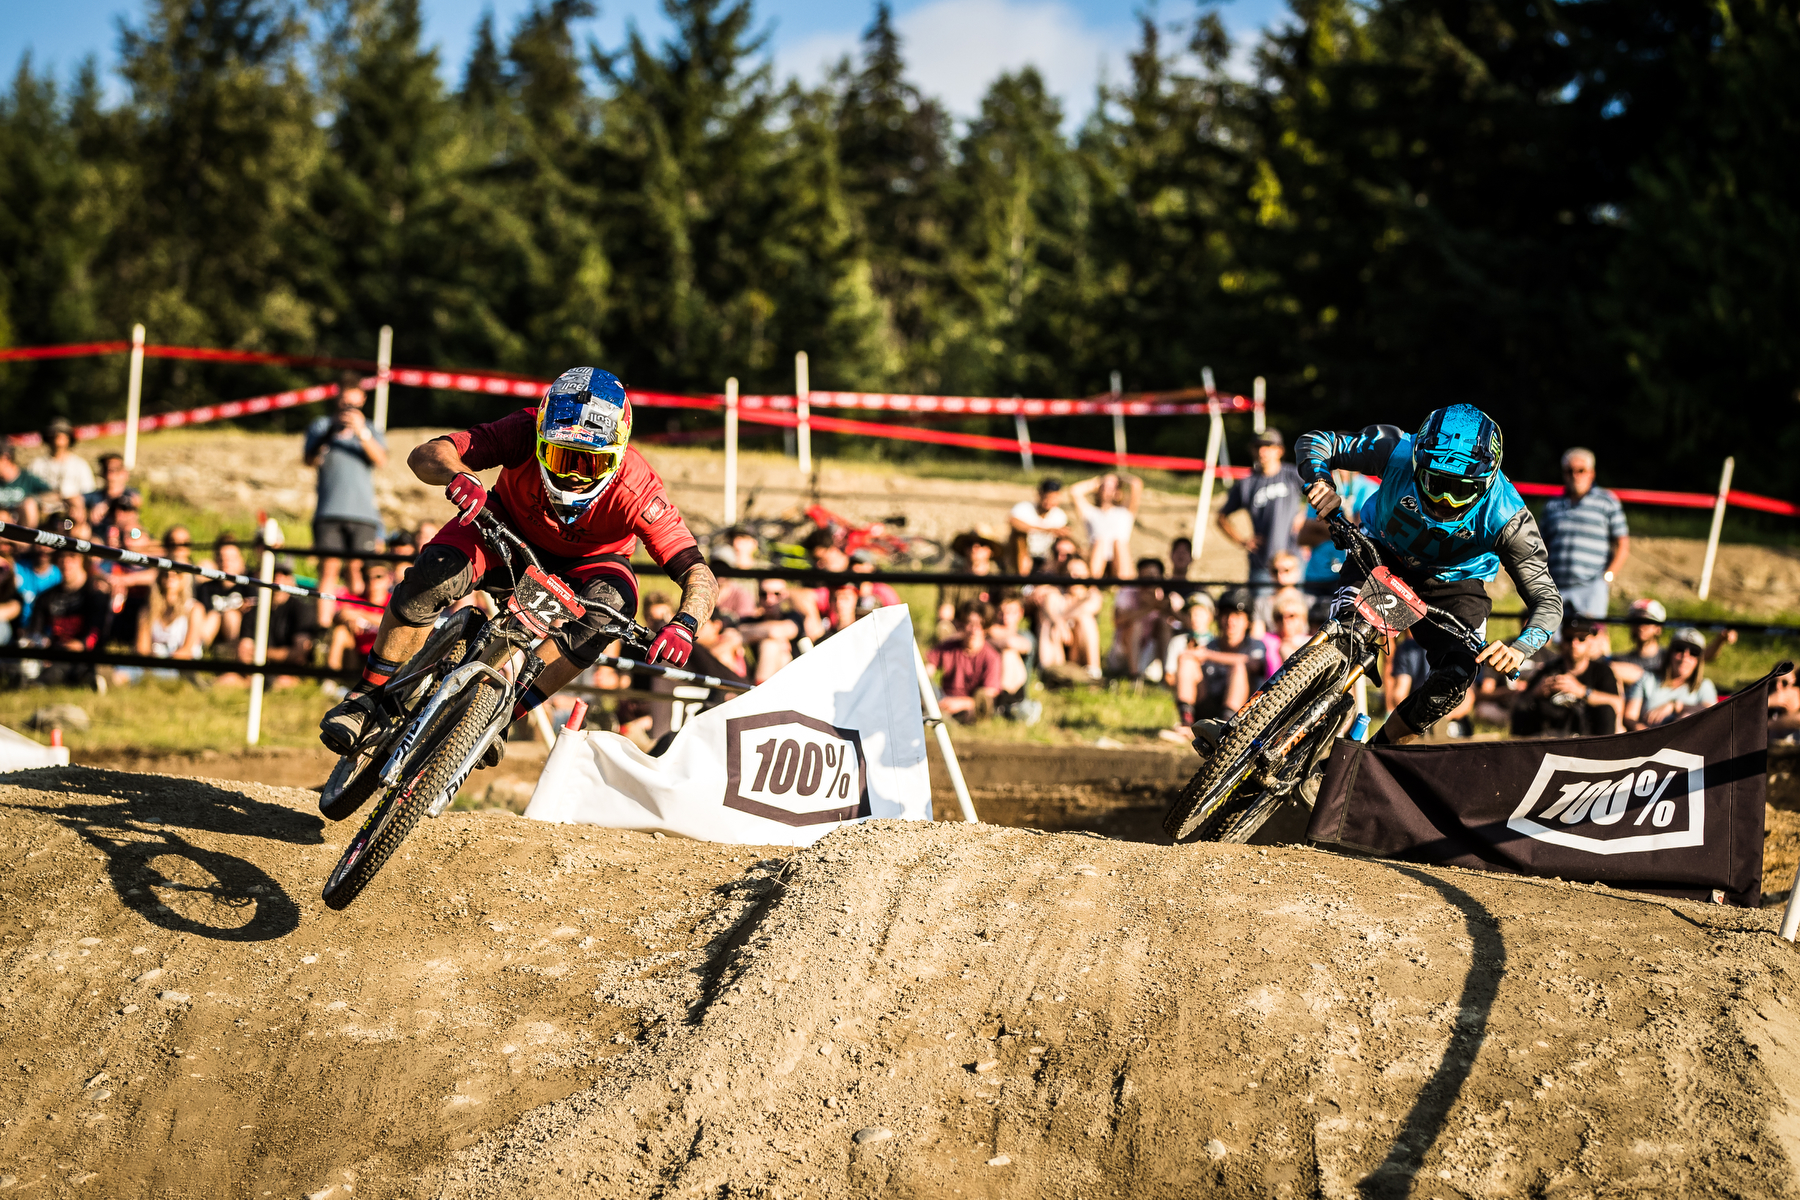 Tomas Slavic and Matthew Sterling go head-to-head in the DUal Slalom.